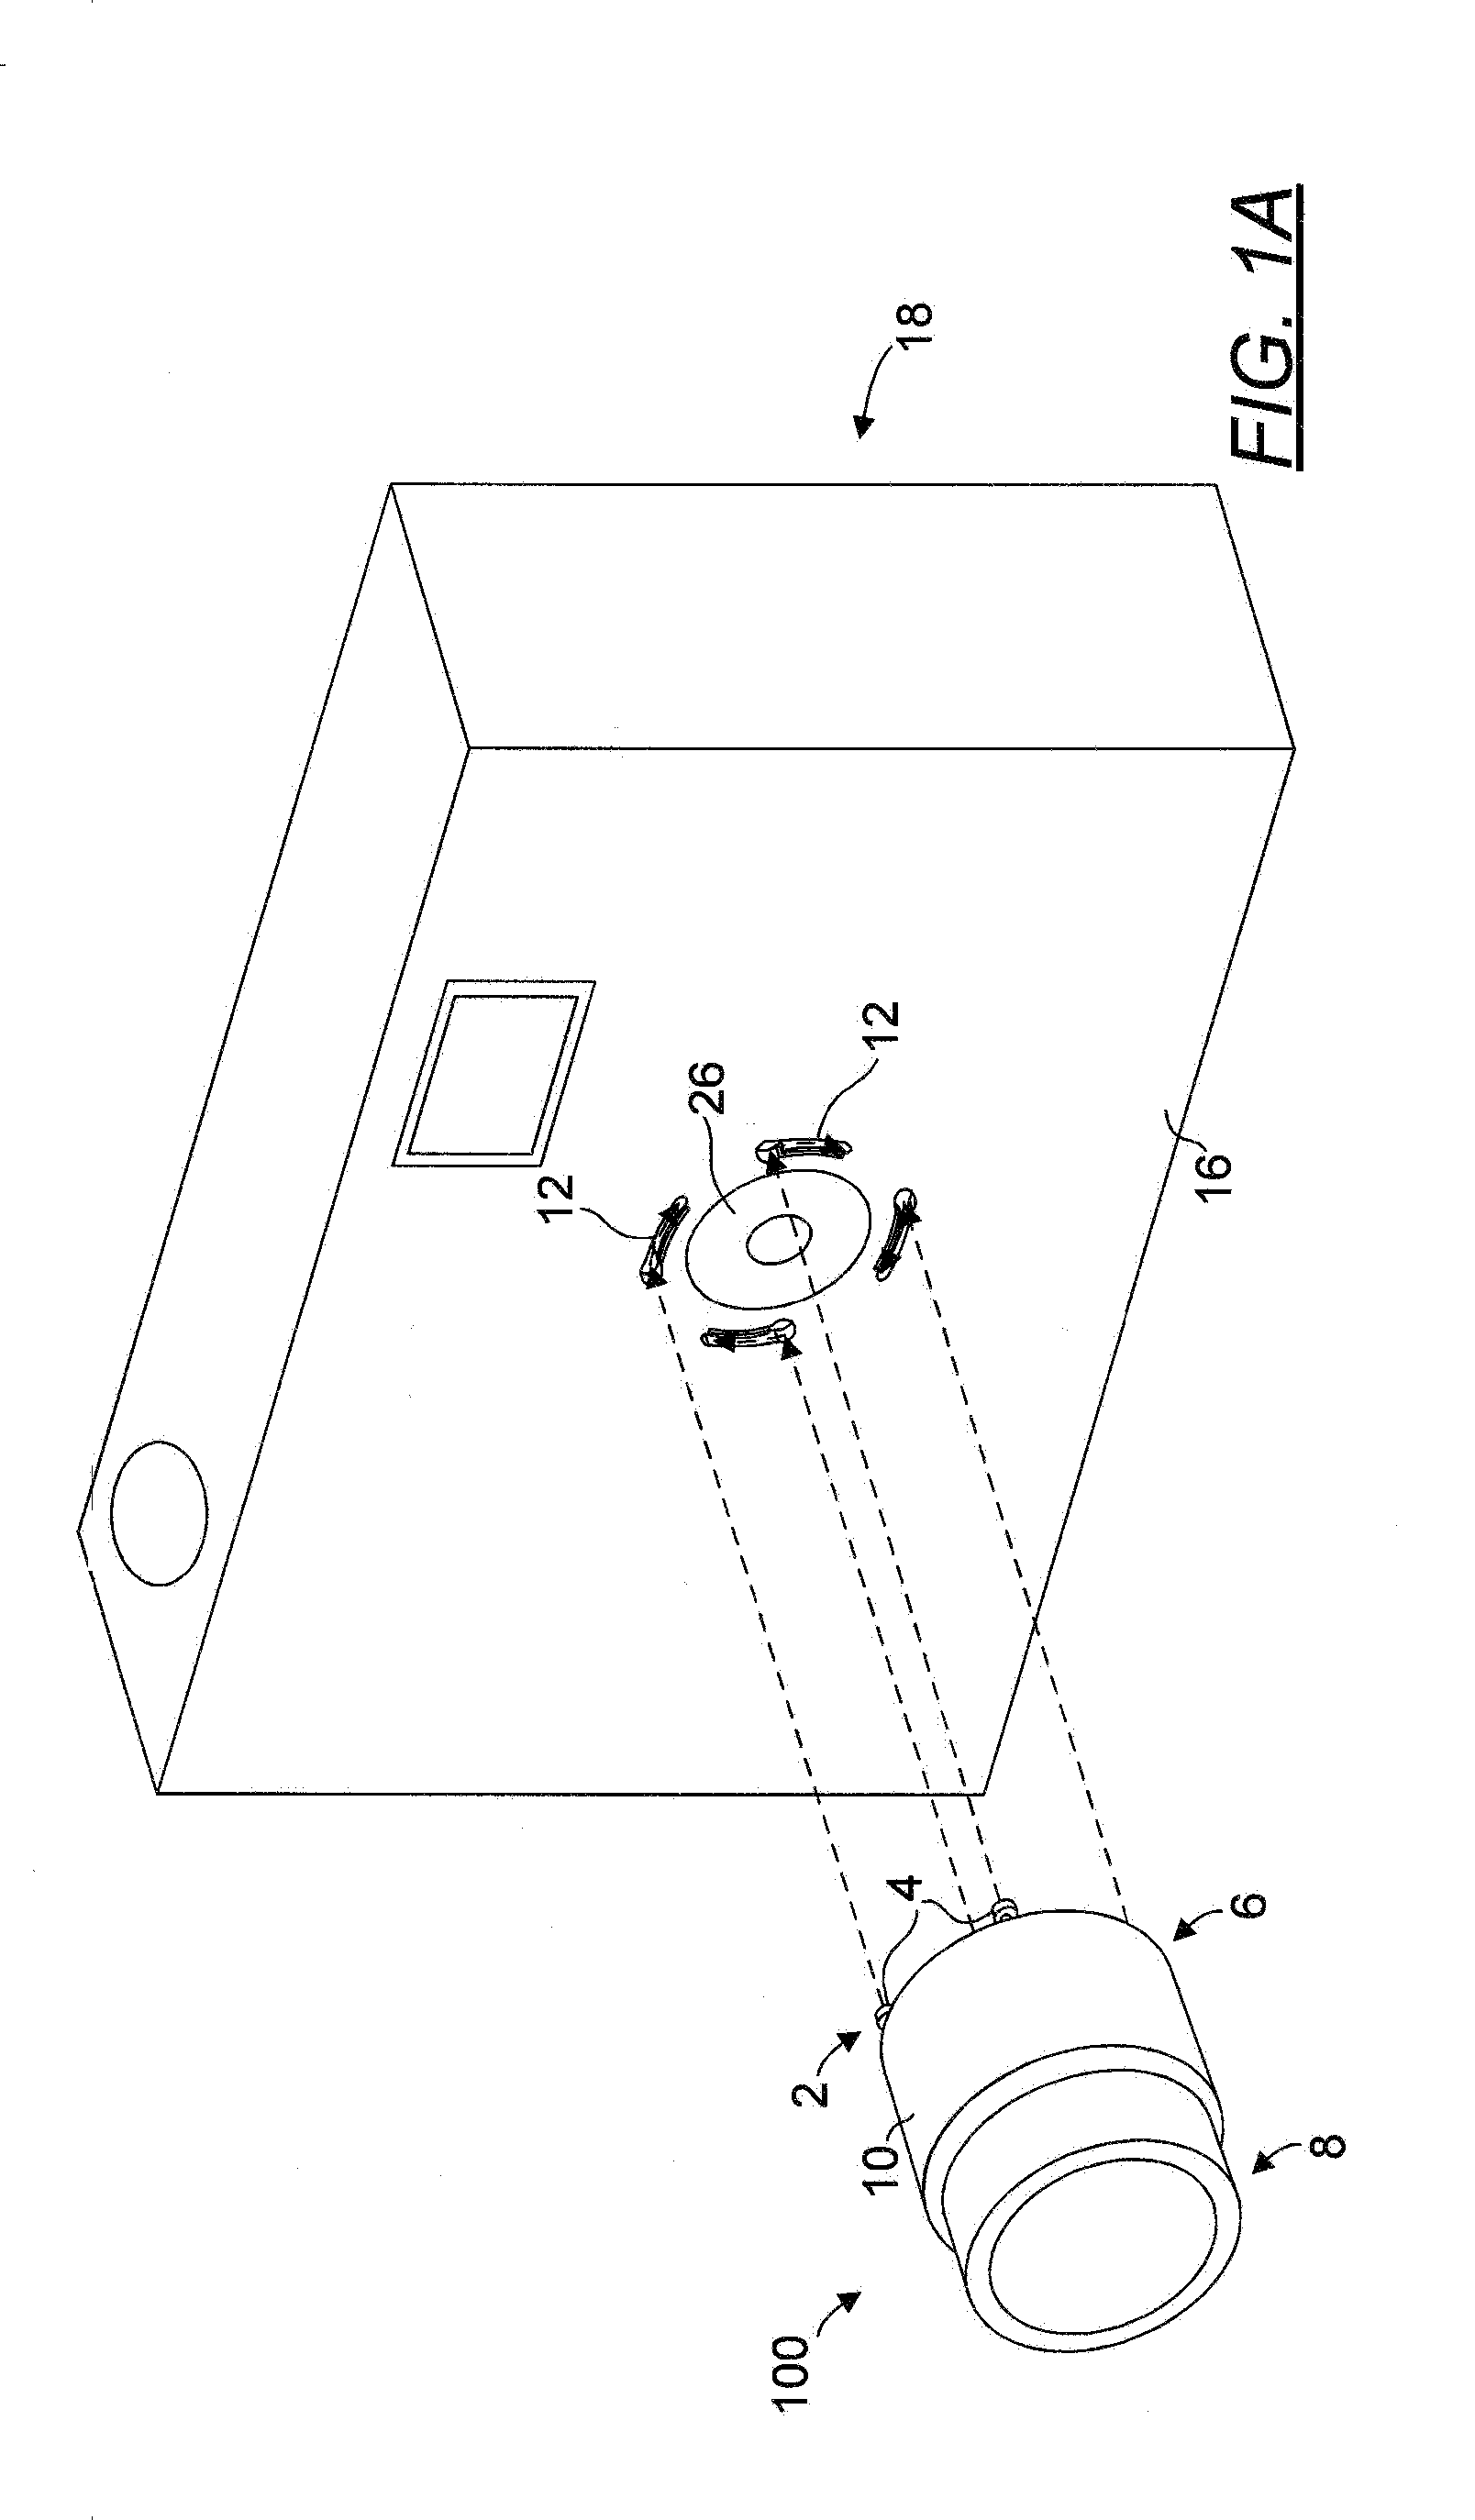 Lens And Display Accessory For Portable Imaging Device